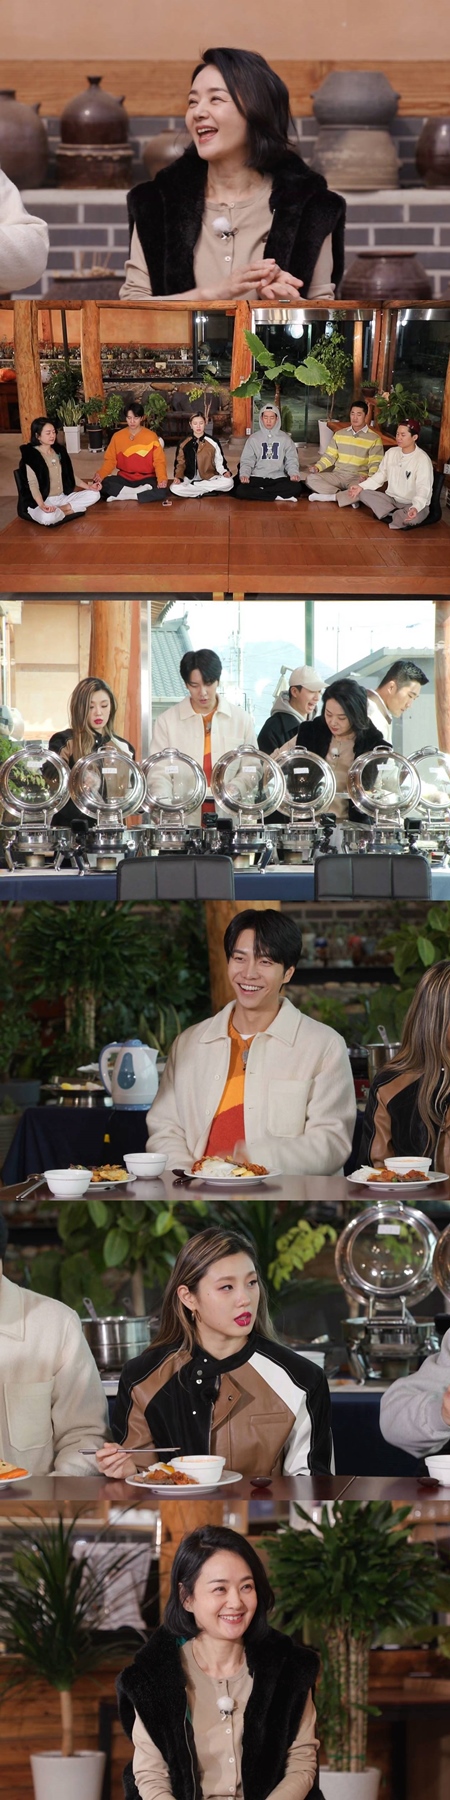 On SBSs All The Butlers, which airs at 6:30 pm on the 20th (Sunday), a special day of actor Bae Jong-ok, the end king of self-management, will be unveiled.On the day of the show, actor Bae Jong-ok, who is called Star during the entertainment industry, will appear as master through thorough self-management.Bae Jong-ok was born in 1964 and despite his age of 59 this year, he showed the beauty of the ultra-strong preservative, which has not changed from his twenties.The secret of preservative beauty is effort that constantly overcomes shortcomings.Bae Jong-ok is expected to reveal her own secret of luxury management from making lemon honey packs that transformed from troubled skin to white skin to special meditation to look into the mind.On the other hand, the members Health MBTI will be released for the first time in the history of entertainment.Bae Jong-ok, who has been adjusting food for 14 years according to his constitution, has been proud to be able to grasp the constitution of the members only with food, stimulating members curiosity.Bae Jong-ok is the back door that prepared various buffet foods and surprised the members by diagnosing the constitution with only the food that the members put in the bowl.Indeed, the health MBTI of the members diagnosed by Bae Jong-ok raises questions about what will happen.The secret of luxury management by Bae Jong-ok, the end king of self-management, and the health MBTI of members diagnosed by Bae Jong-ok were broadcast on SBS All The Butlers at 6:30 pm on the 20th (Sunday).